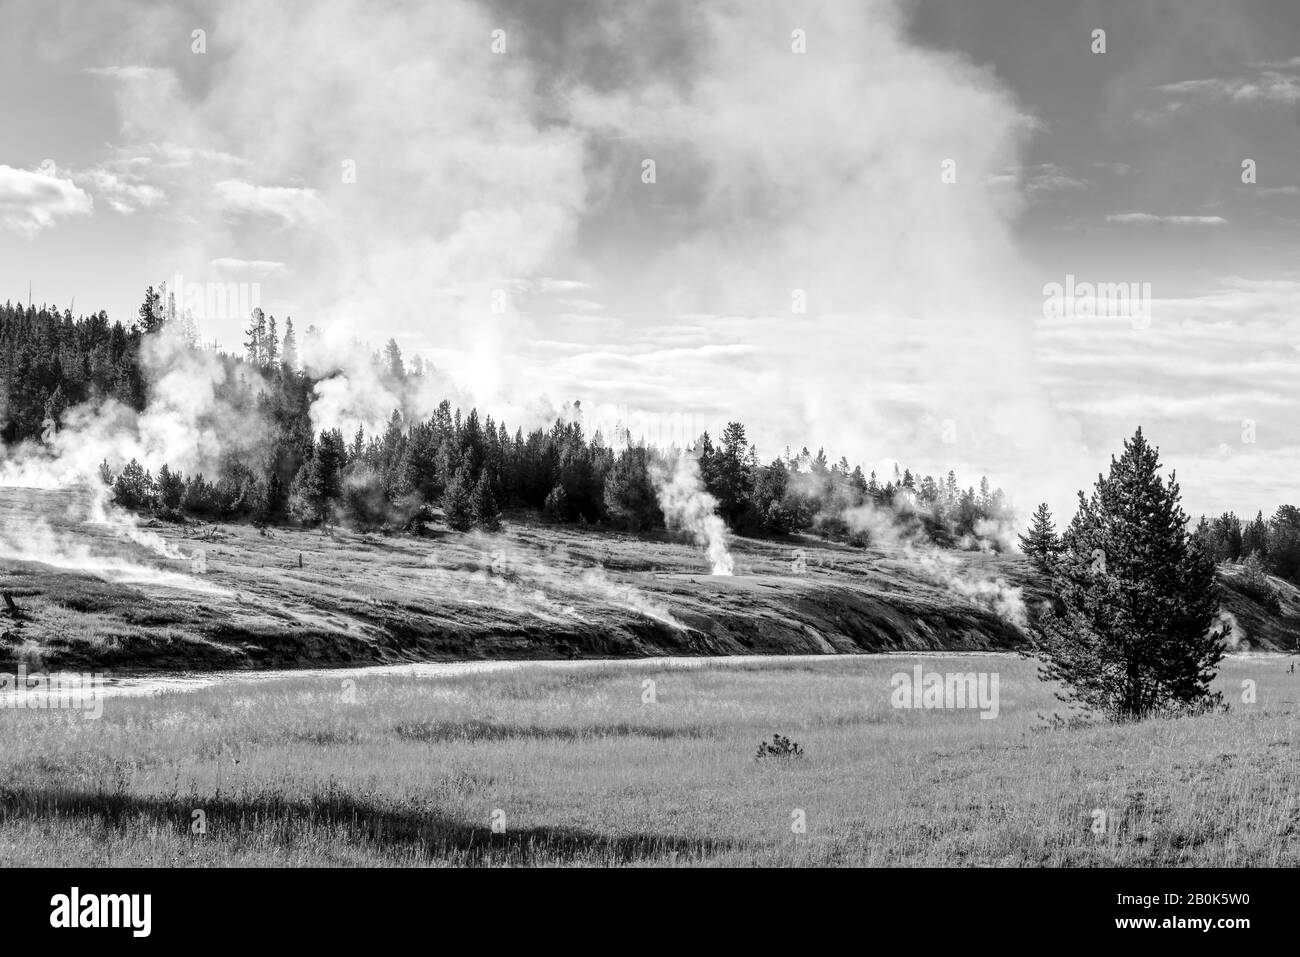 Steam venting from the earth in and around forest trees, water running off into stream. Black and white. Stock Photo